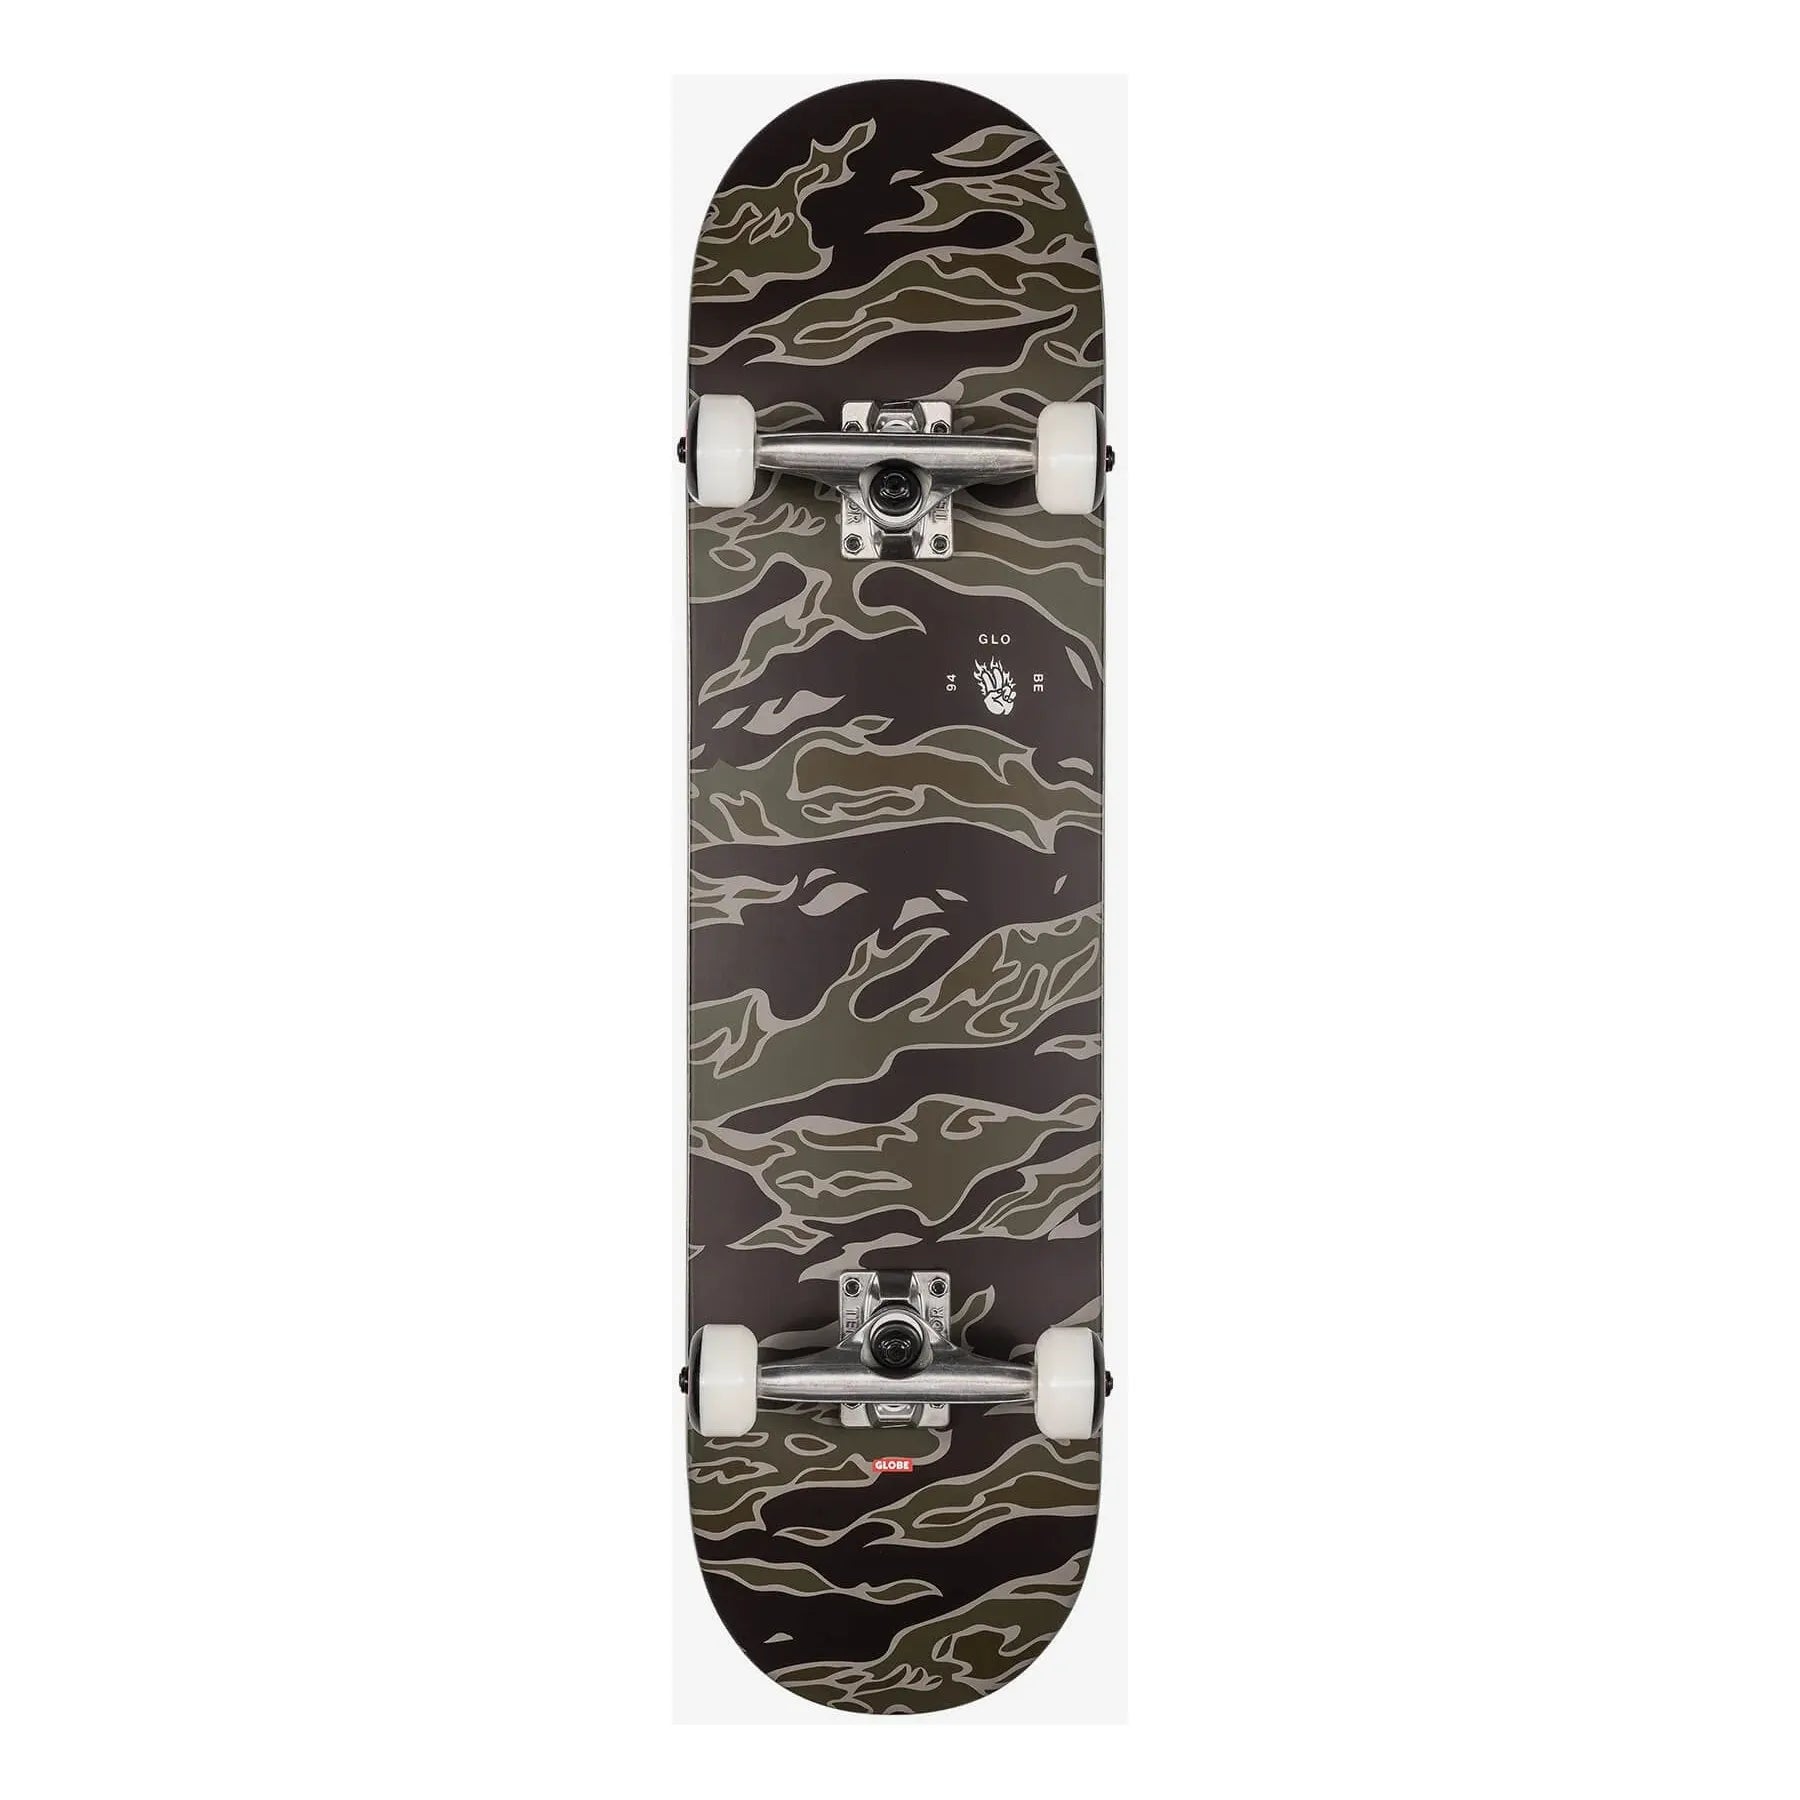 GLOBE G1 FULL ON TIGER CAMO 8.0 COMPLETE